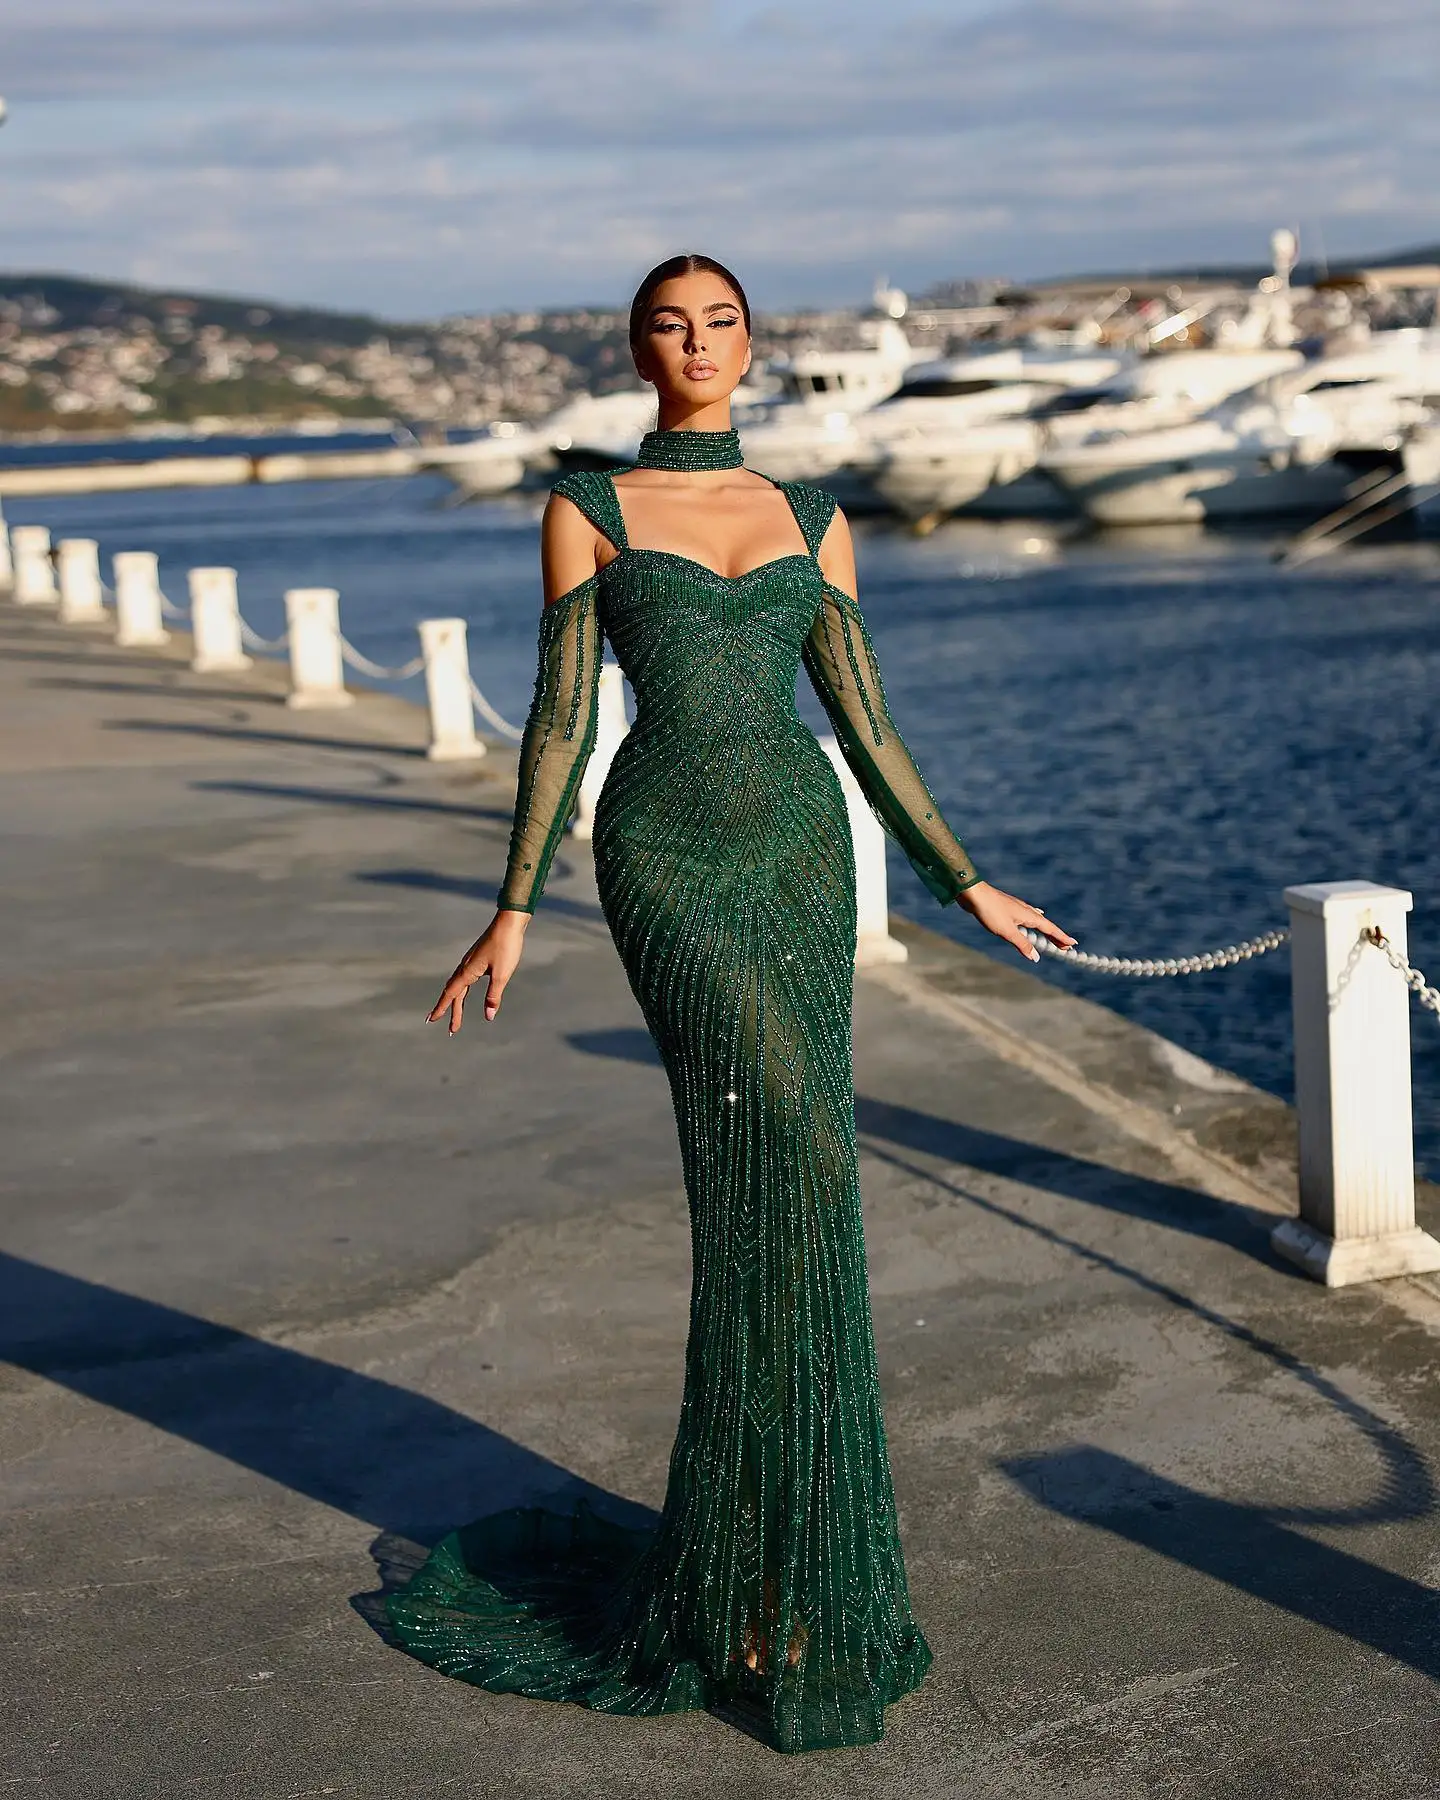 

Glamorous Emerald Green Evening Dresses High Neck Sheer Illusion Prom Gowns Custom Made Lace Beading Tassels Party Dresses